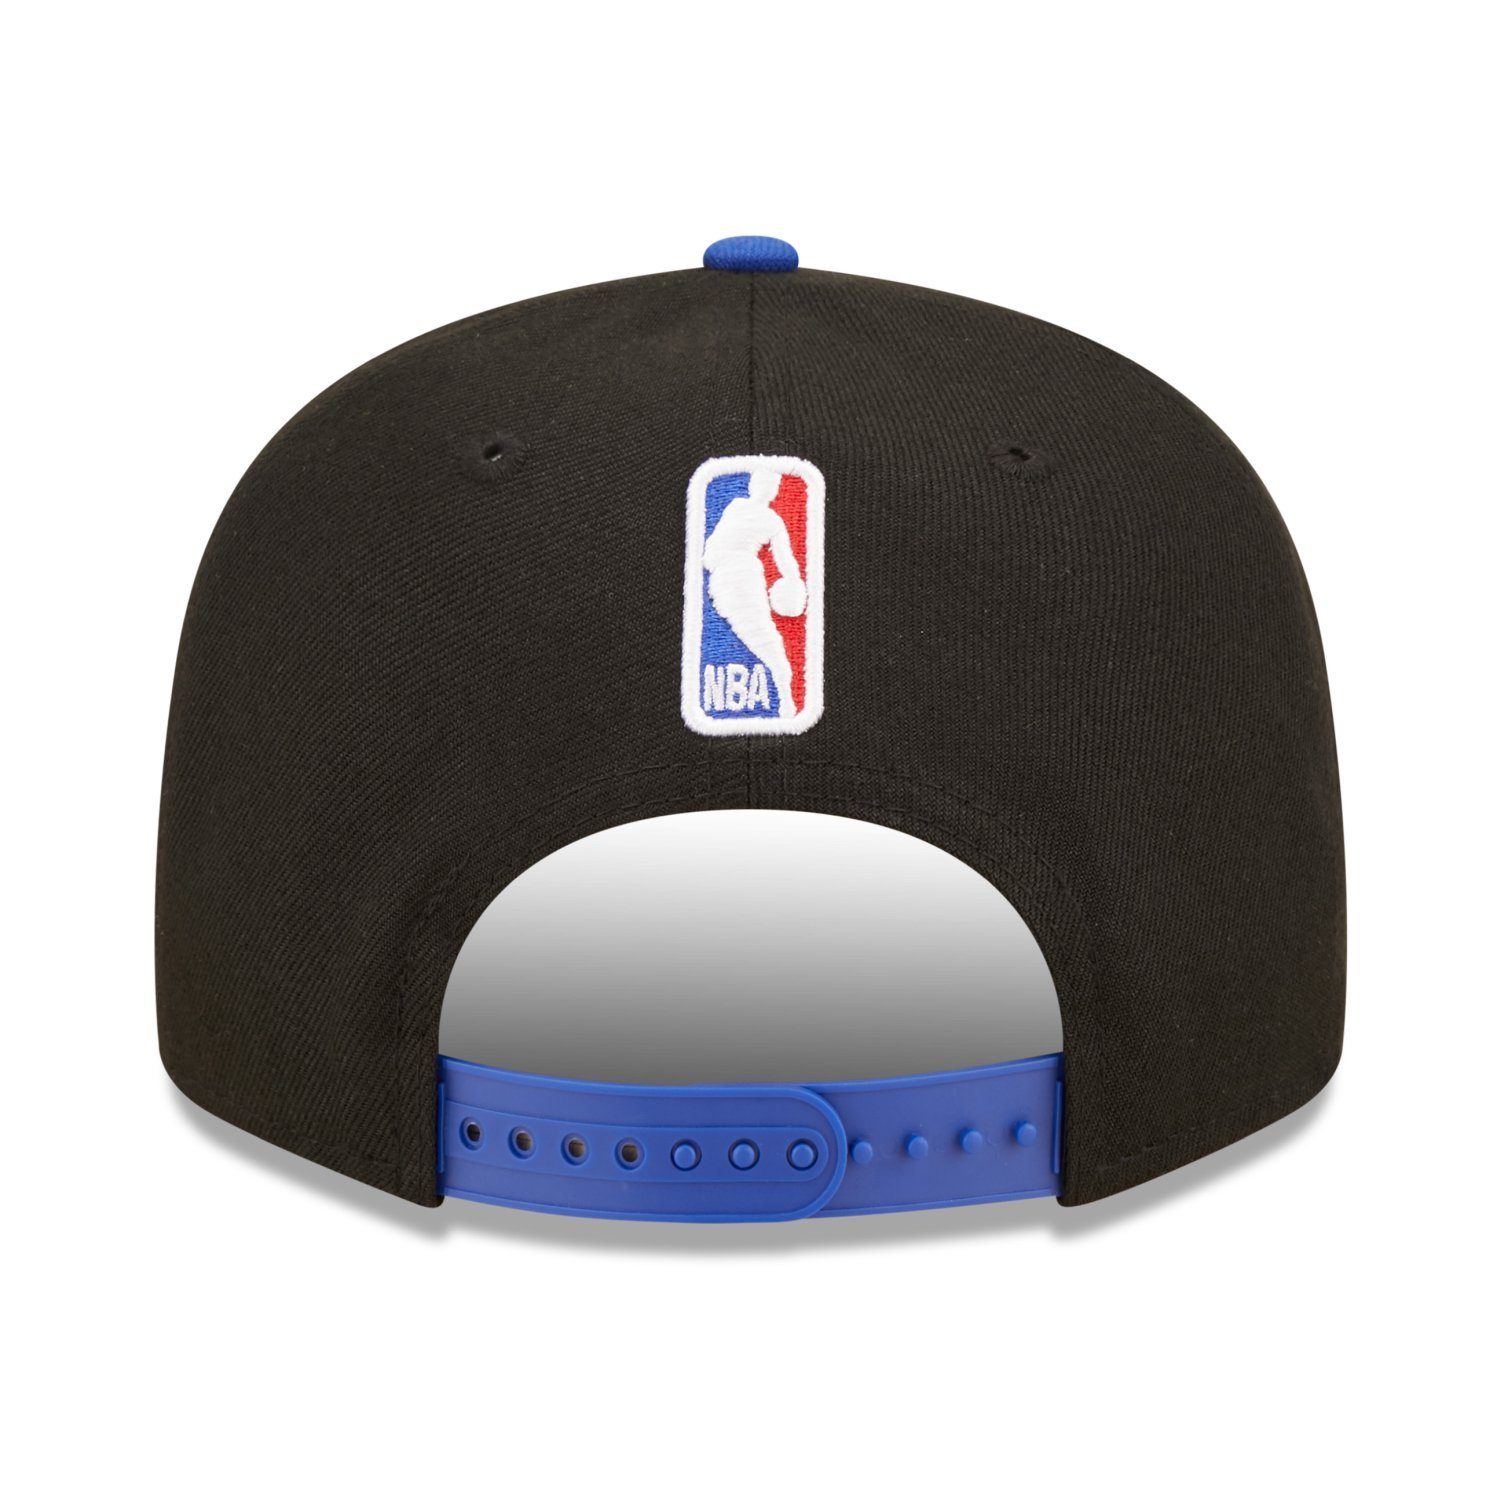 New Era Snapback Angeles TIPOFF Cap 9FIFTY Los Clippers